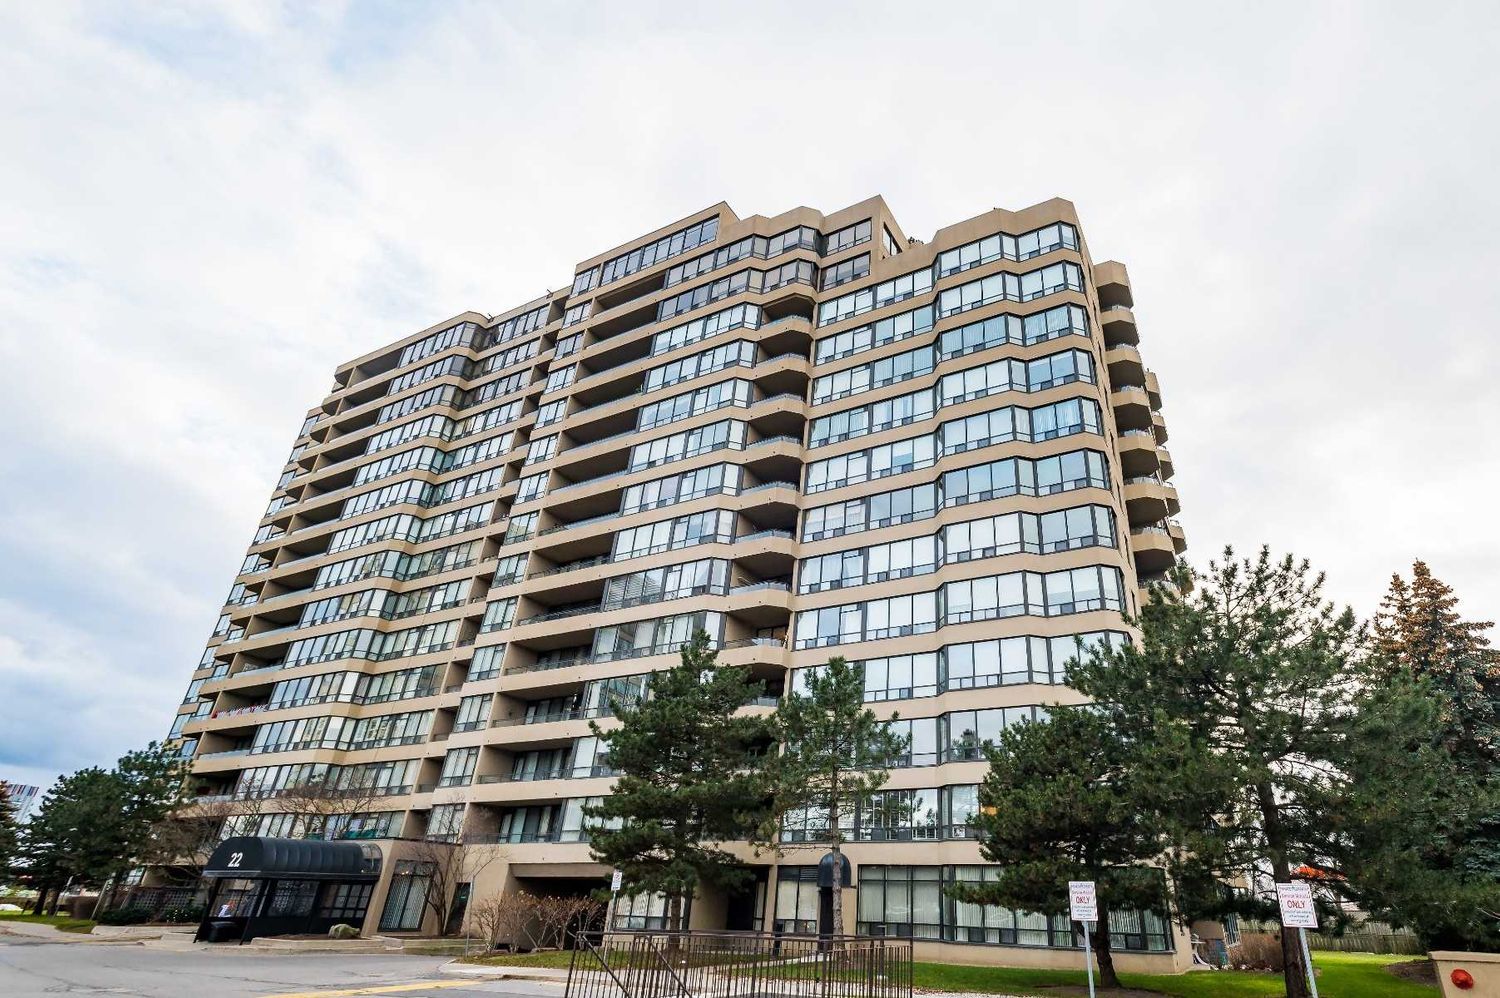 22 Clarissa Drive. Gibraltar Condos is located in  Richmond Hill, Toronto - image #1 of 3